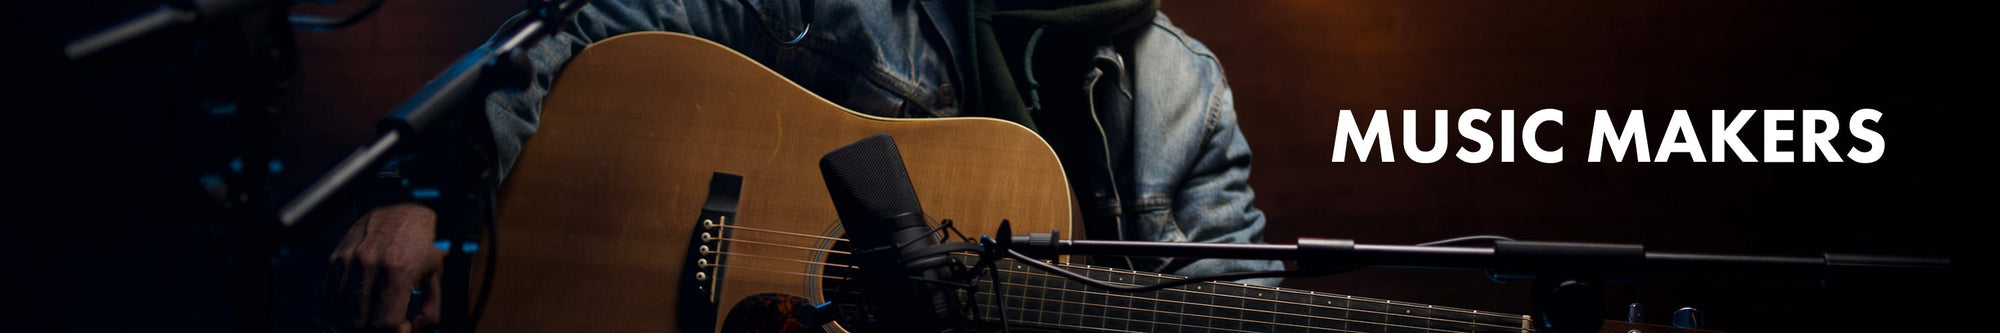 Microphones for Musicians & Instruments